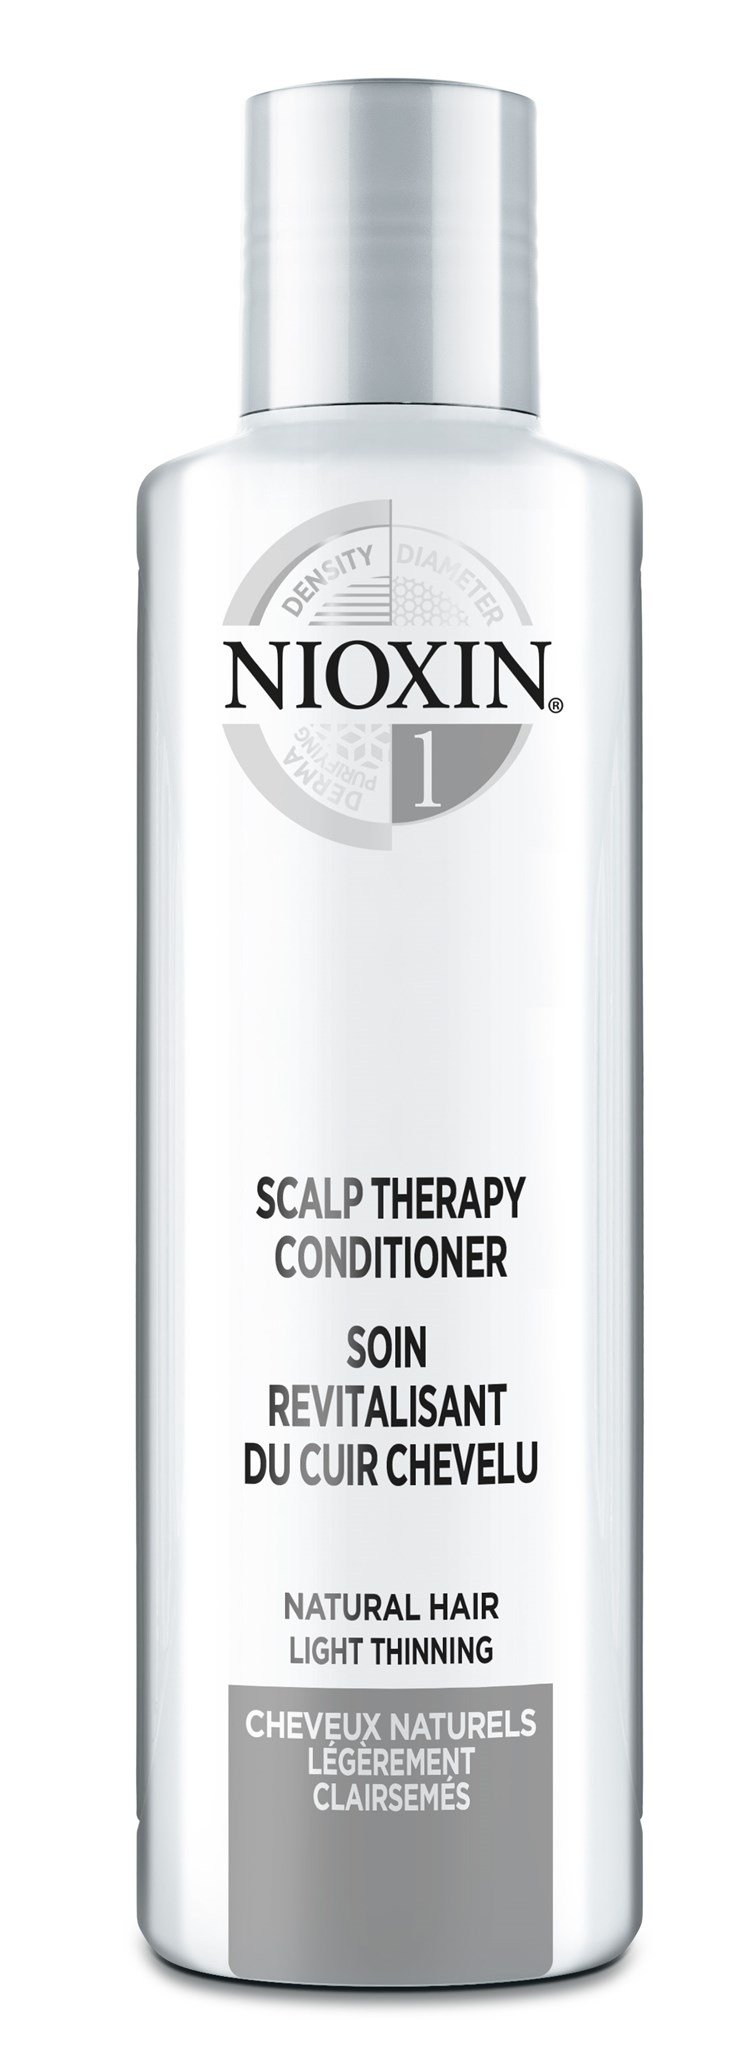 NIOXIN - System 1 Scalp Therapy Conditioner 300ml